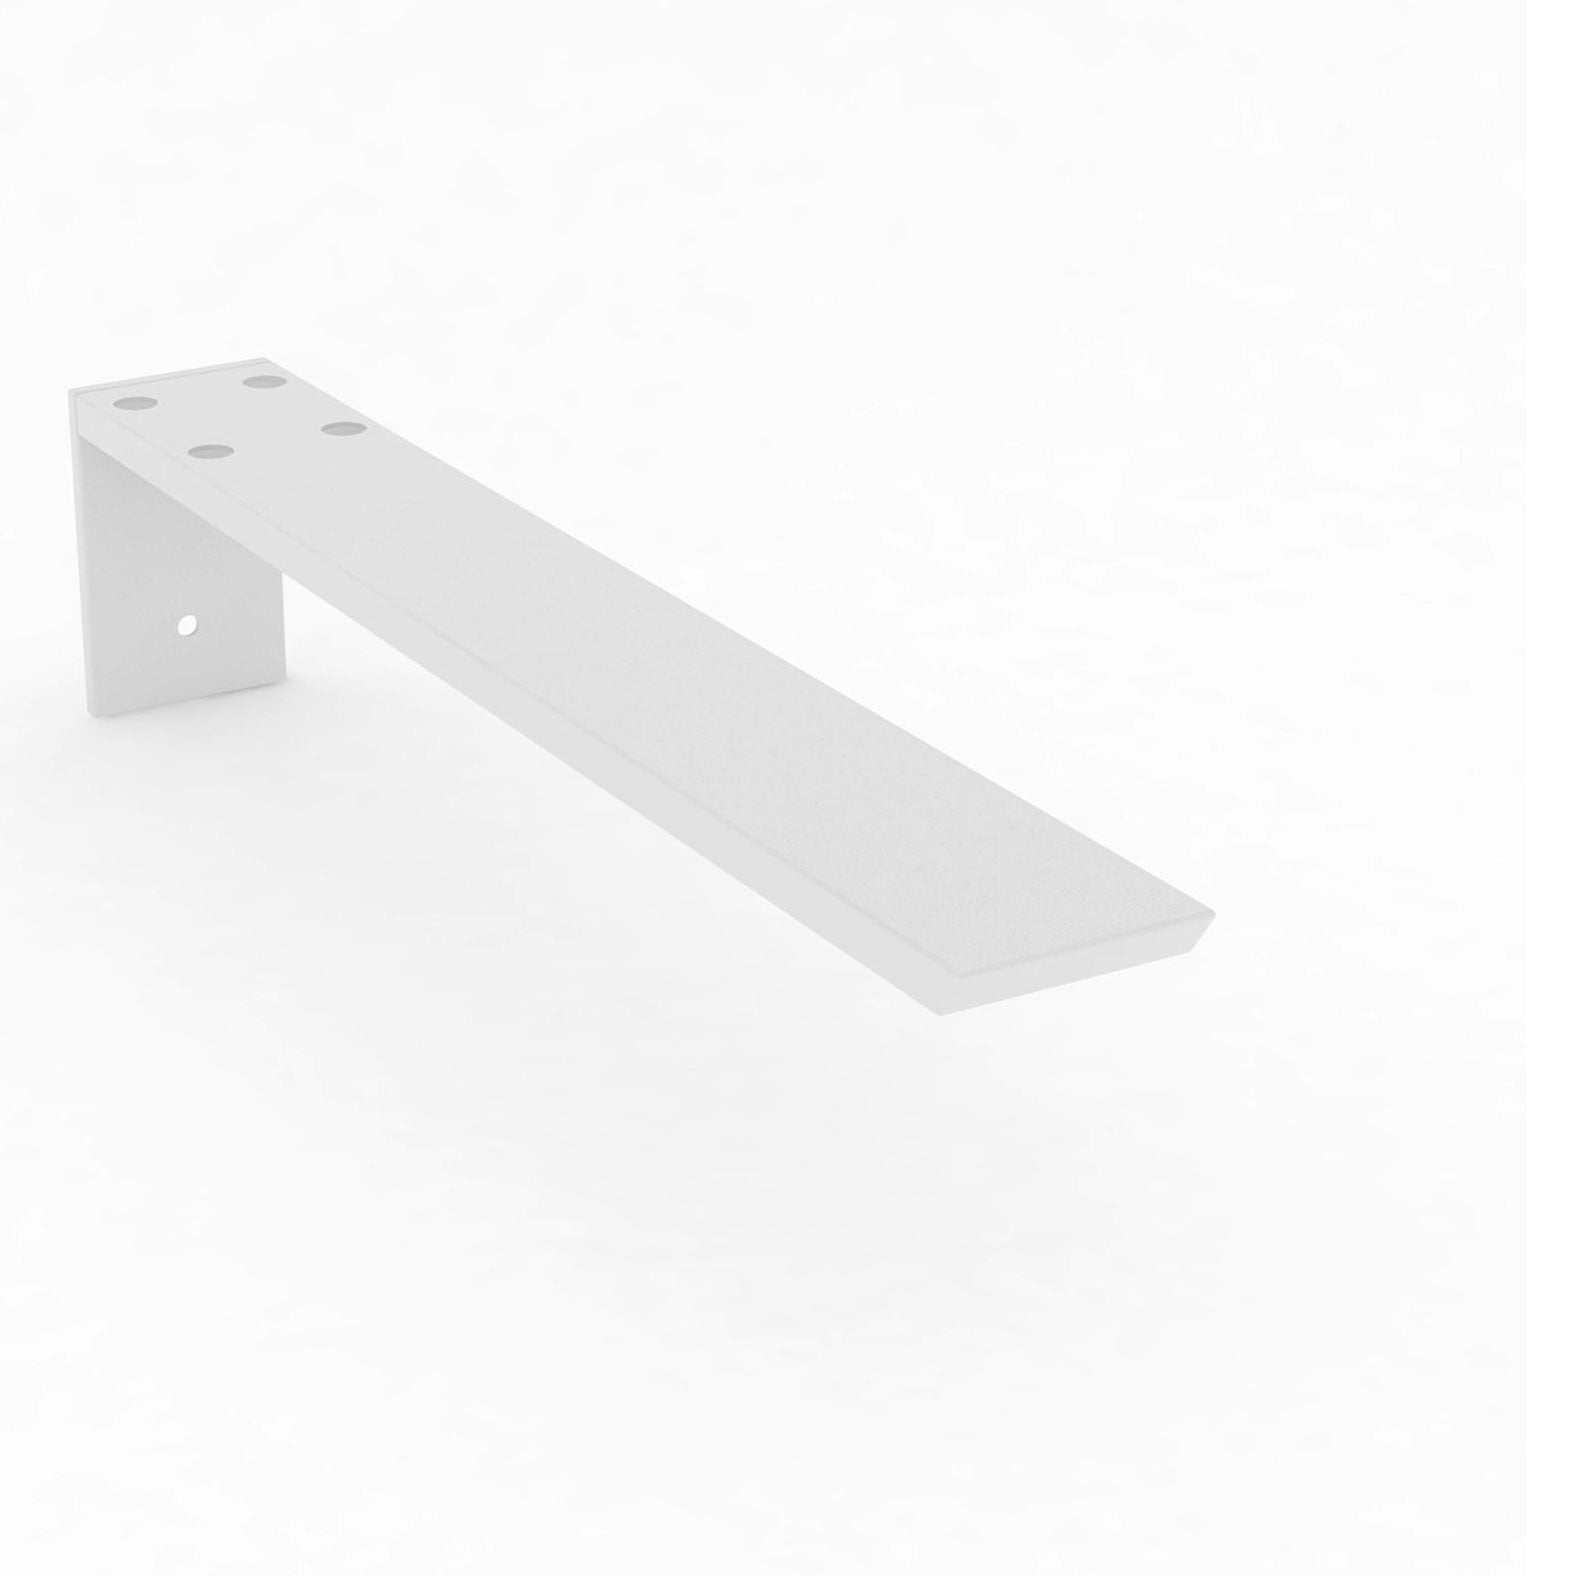 Hidden Granite Countertop L Bracket - 18" White. Sturdy support for kitchen islands and pony walls.